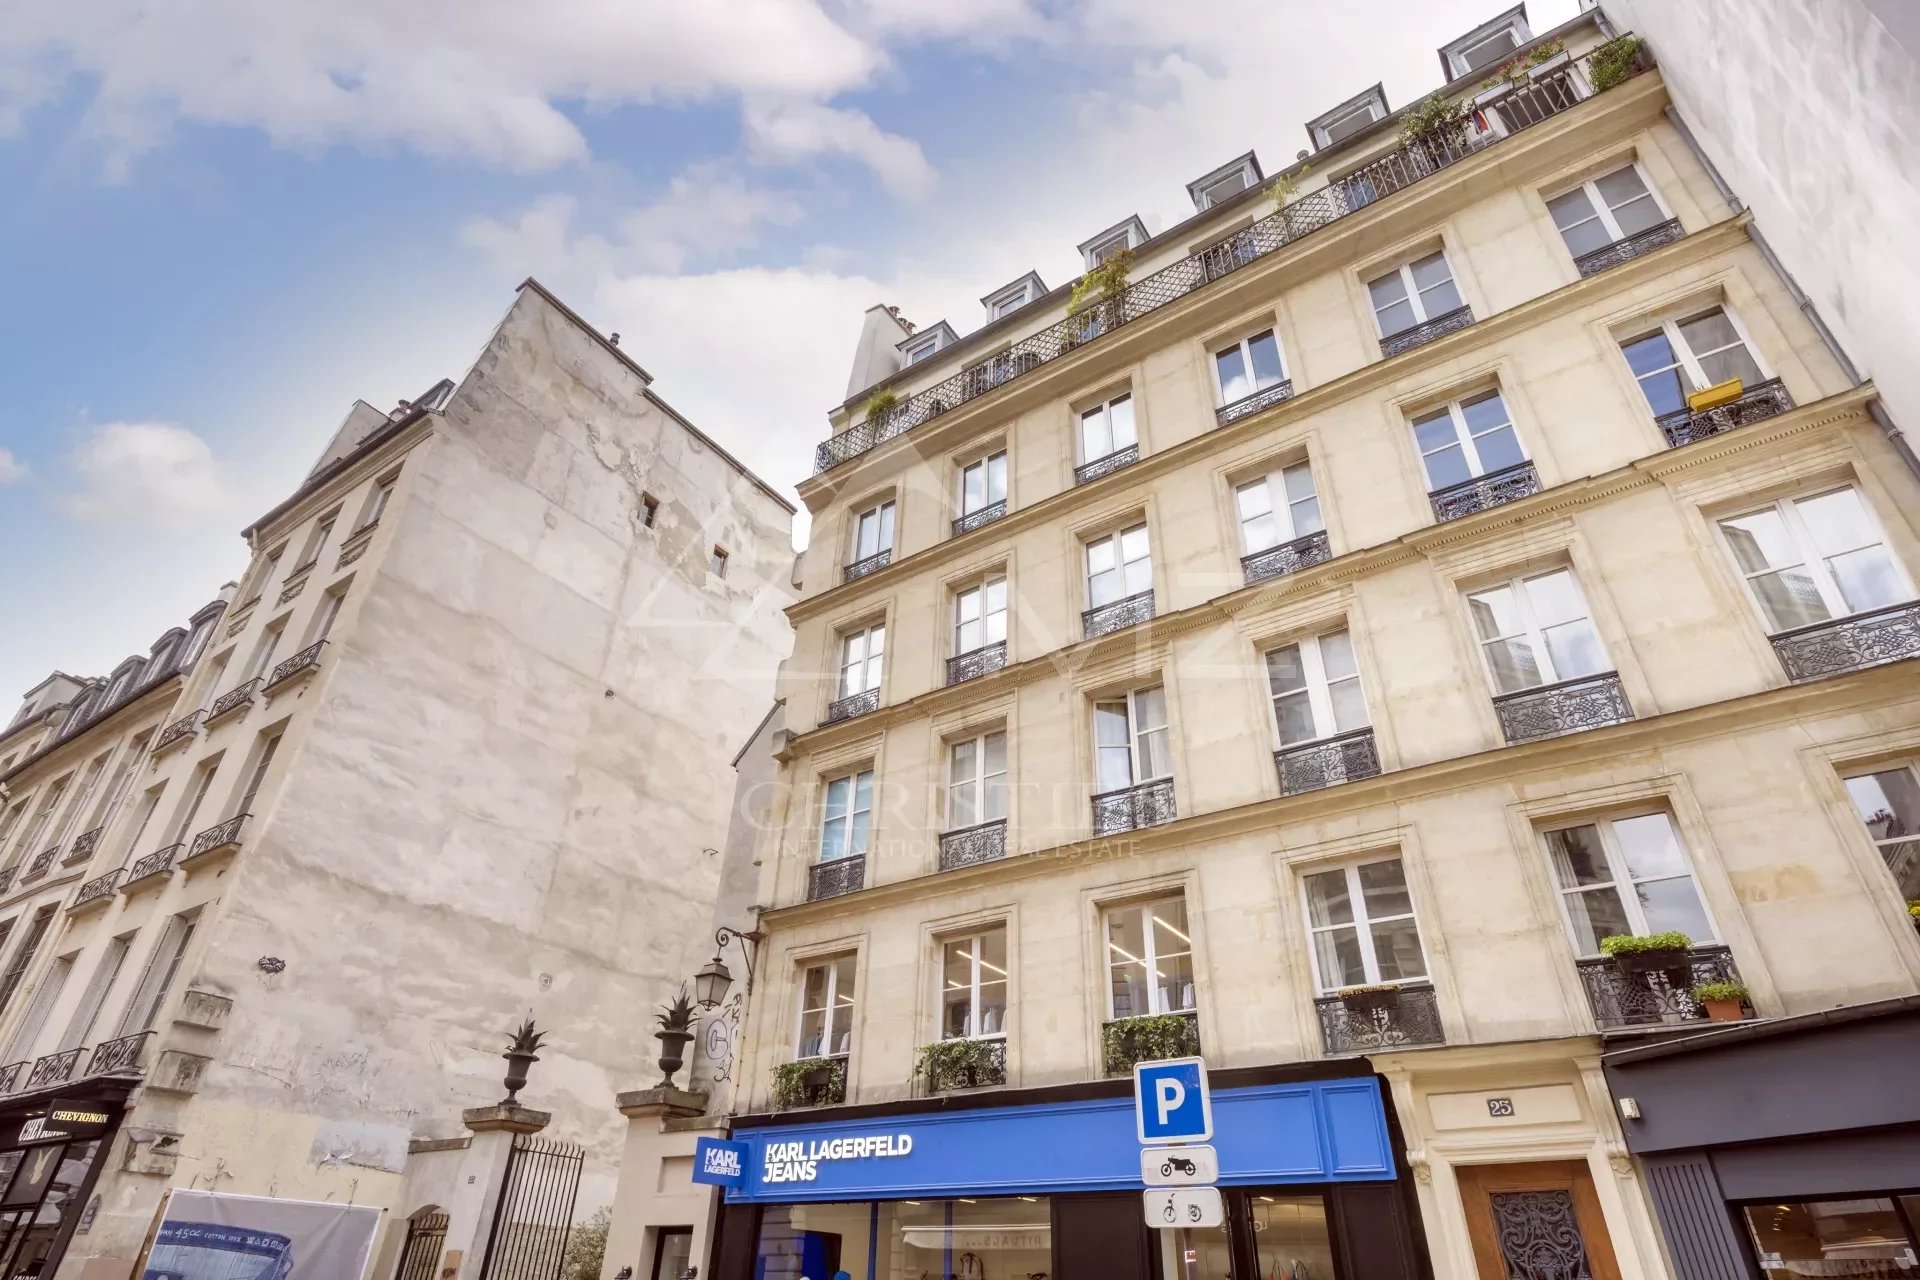 Apartment in Rue Vieille du Temple in the Marais to renovate